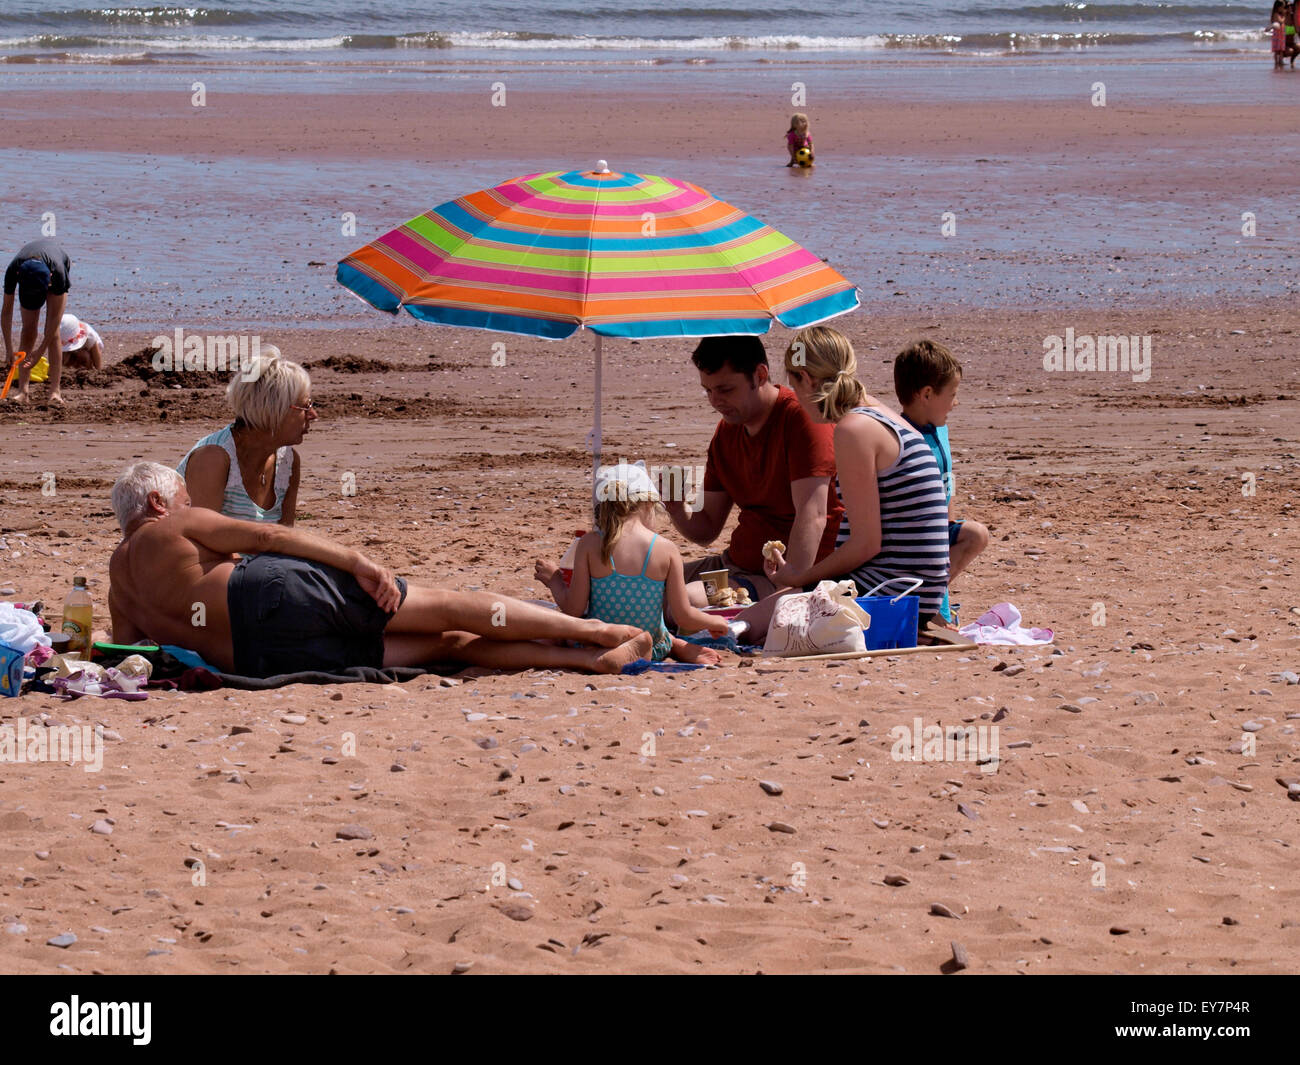 Three Generations of the same family having a picnic together at the beach, Goodrington Sands Paignton, Devon, UK Stock Photo